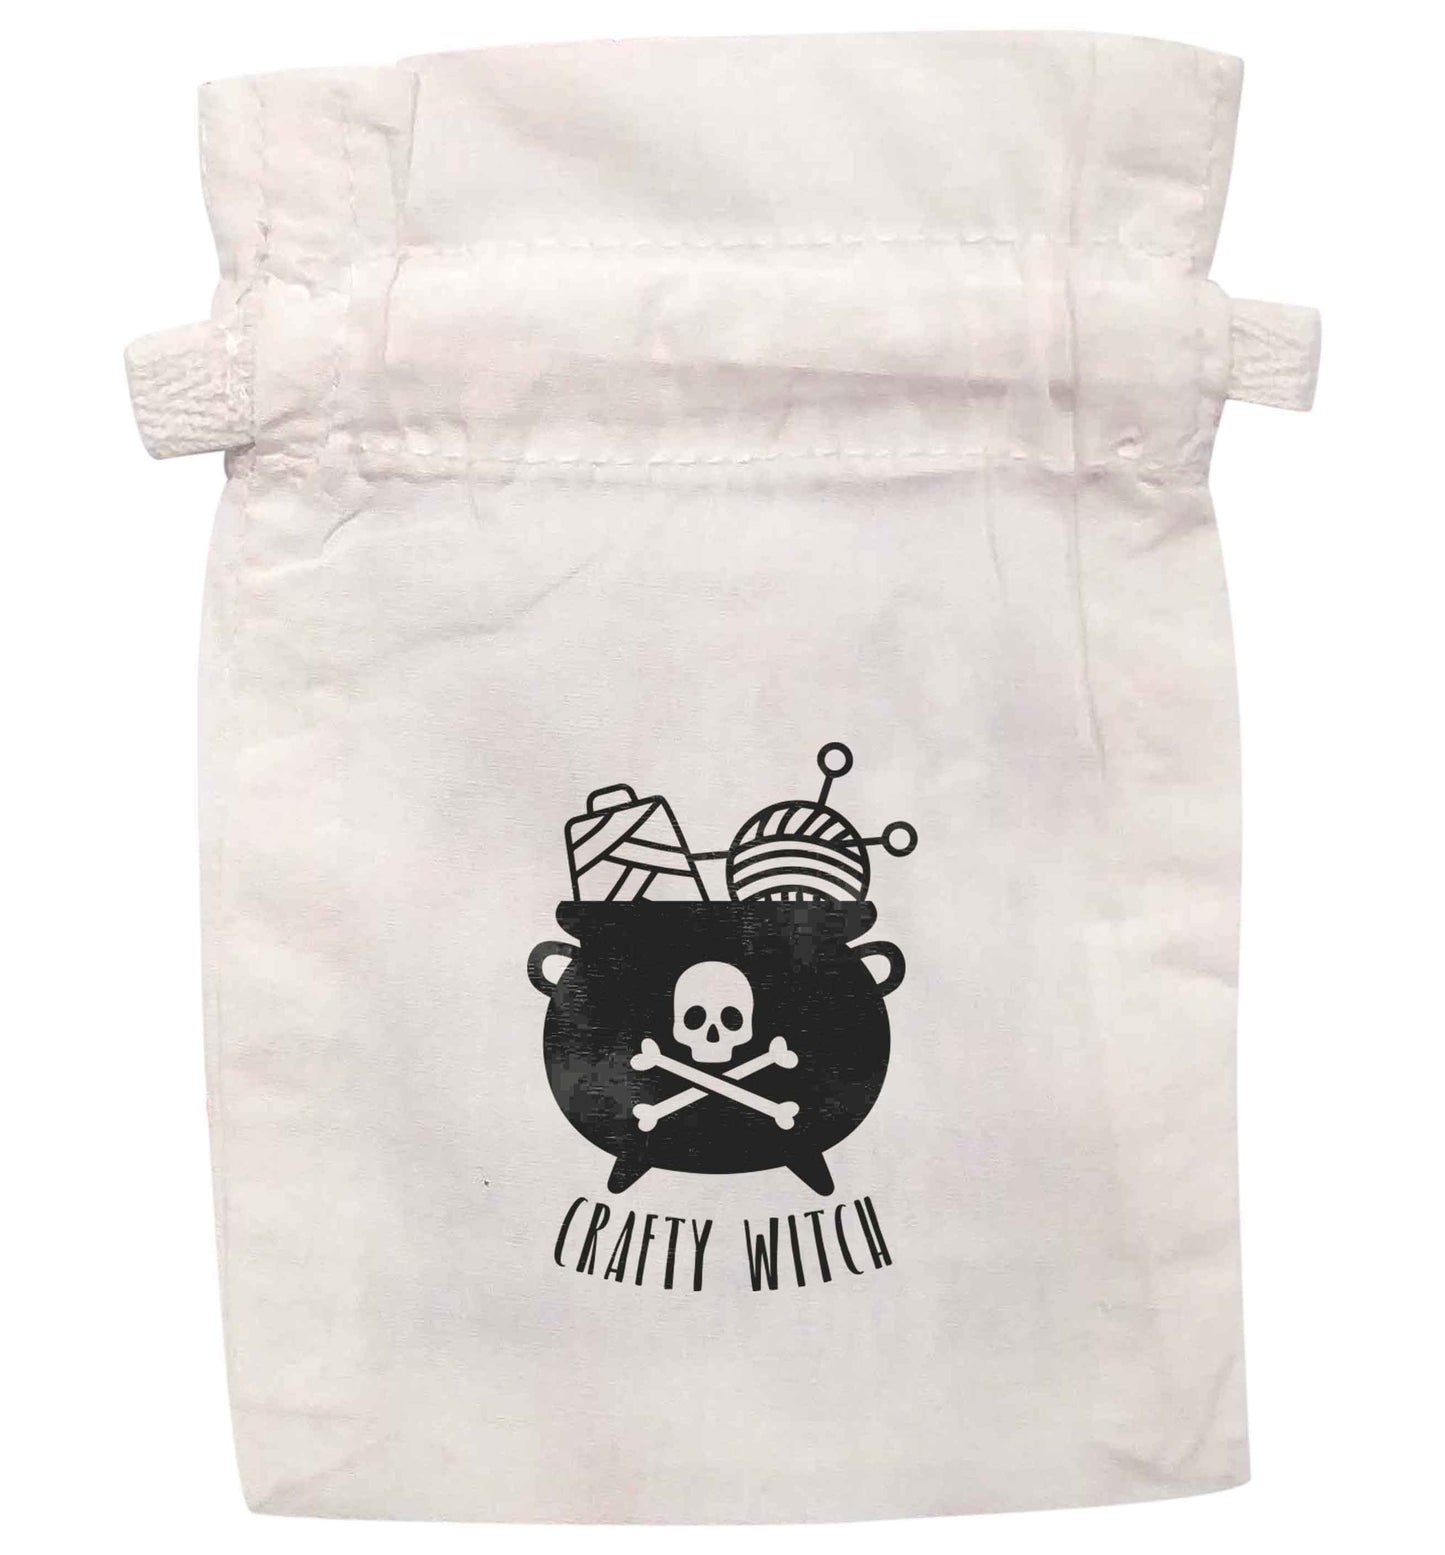 Crafty witch | XS - L | Pouch / Drawstring bag / Sack | Organic Cotton | Bulk discounts available!